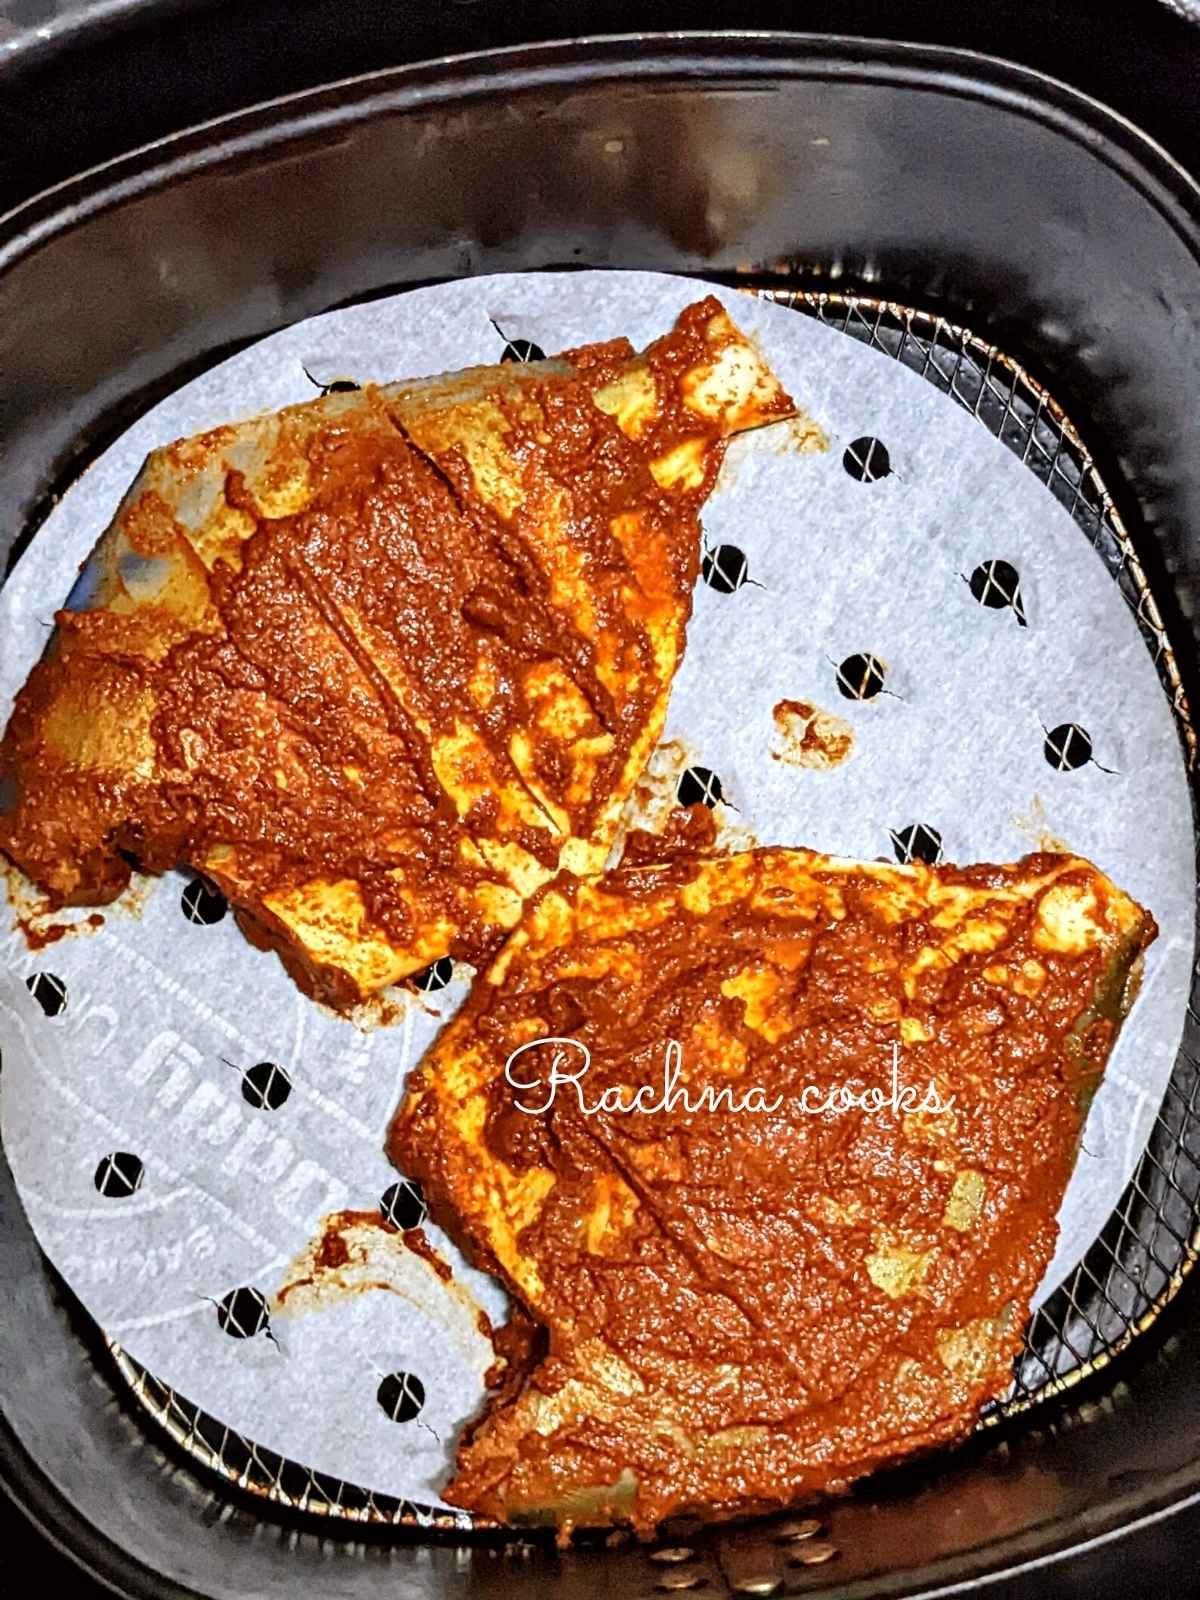 2 pomfret fish coated with masala and placed in air fryer basket for frying.